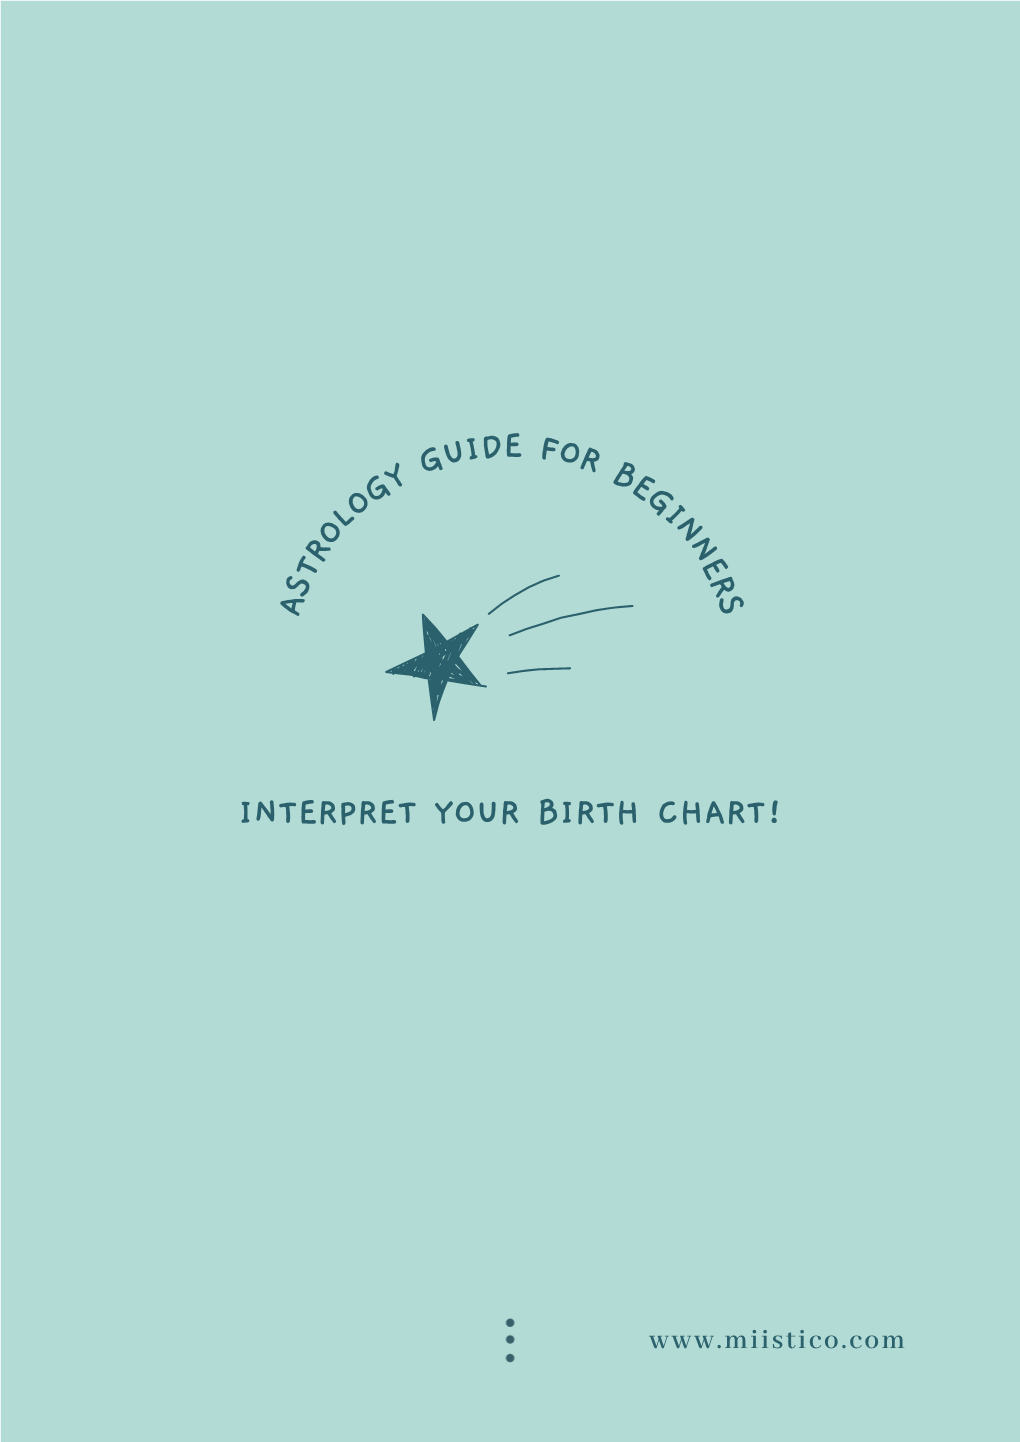 Interpret Your Birth Chart! Astrology Guide